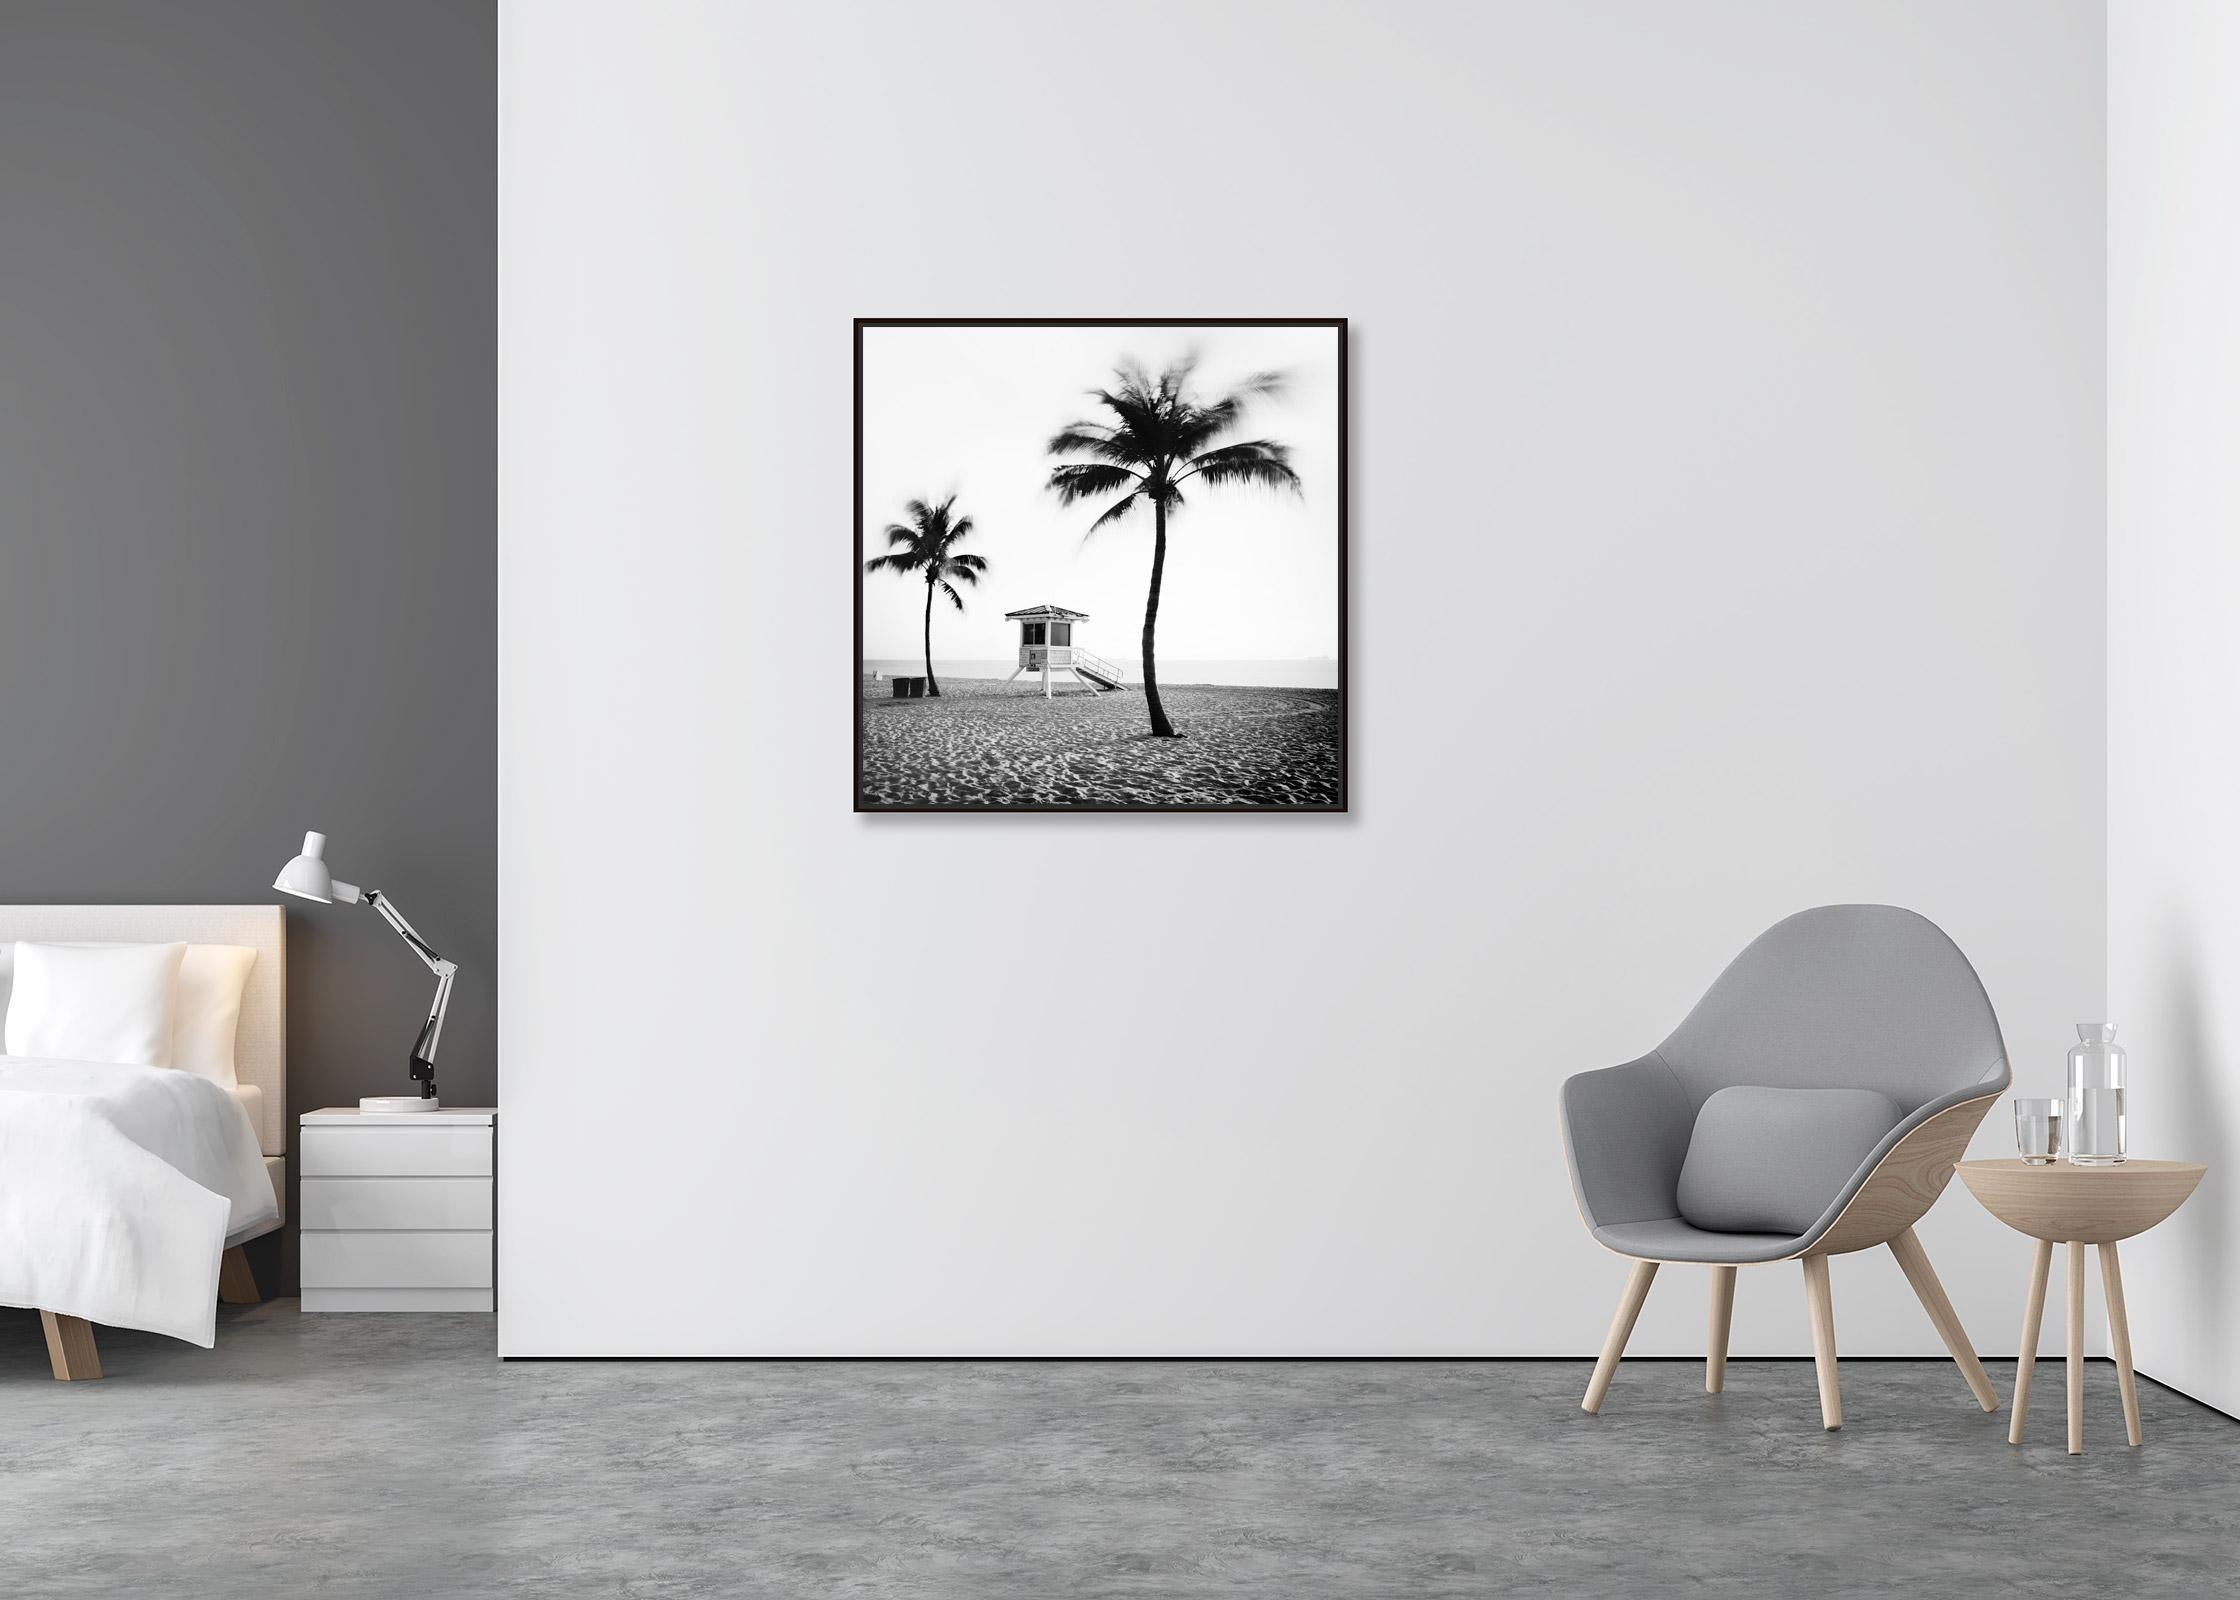 Fort Lauderdale Beach, Florida, USA, black & white art landscape photography - Contemporary Photograph by Gerald Berghammer